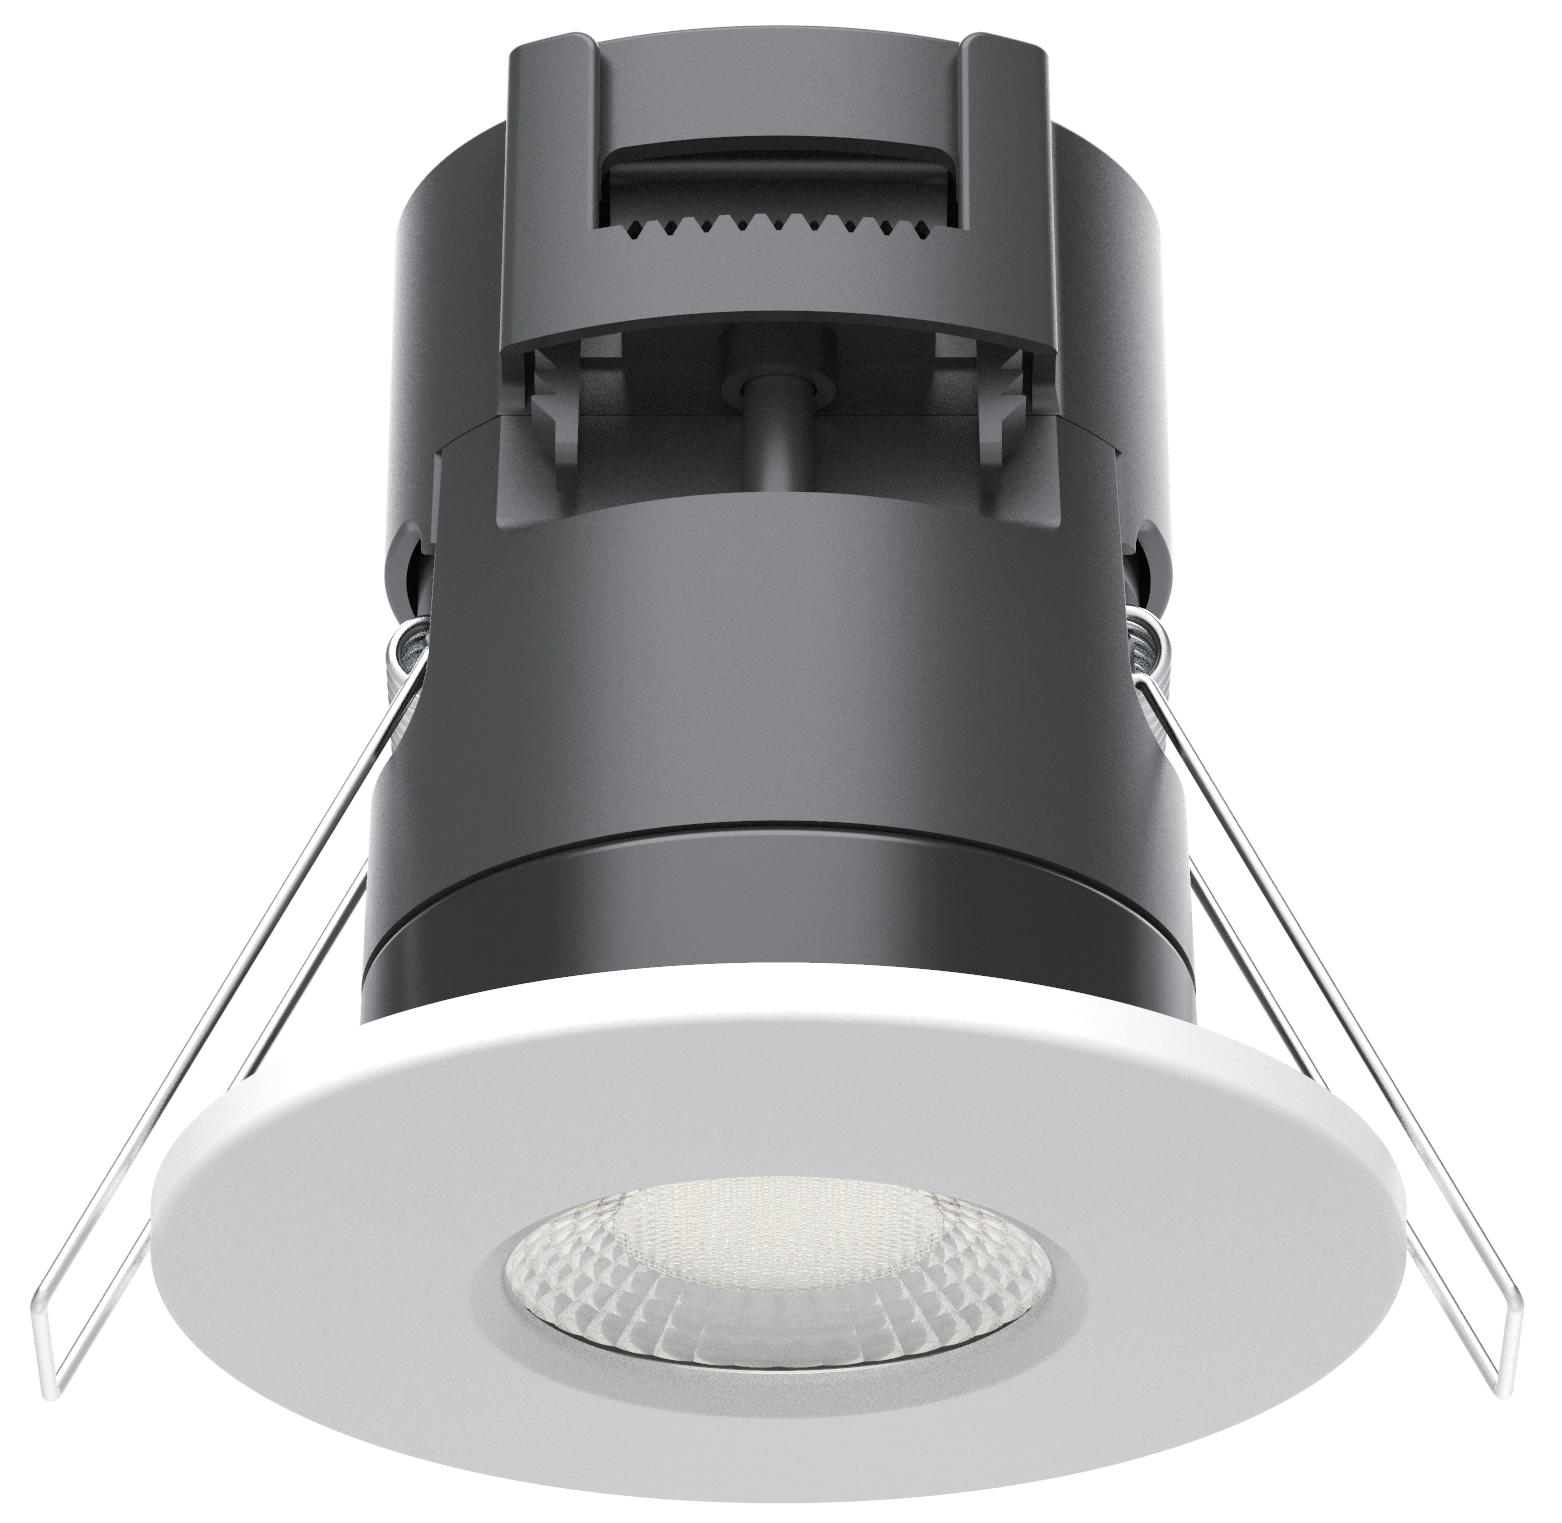 Front 3CCT Switchable Led Fire Rated Dimmable Downlight